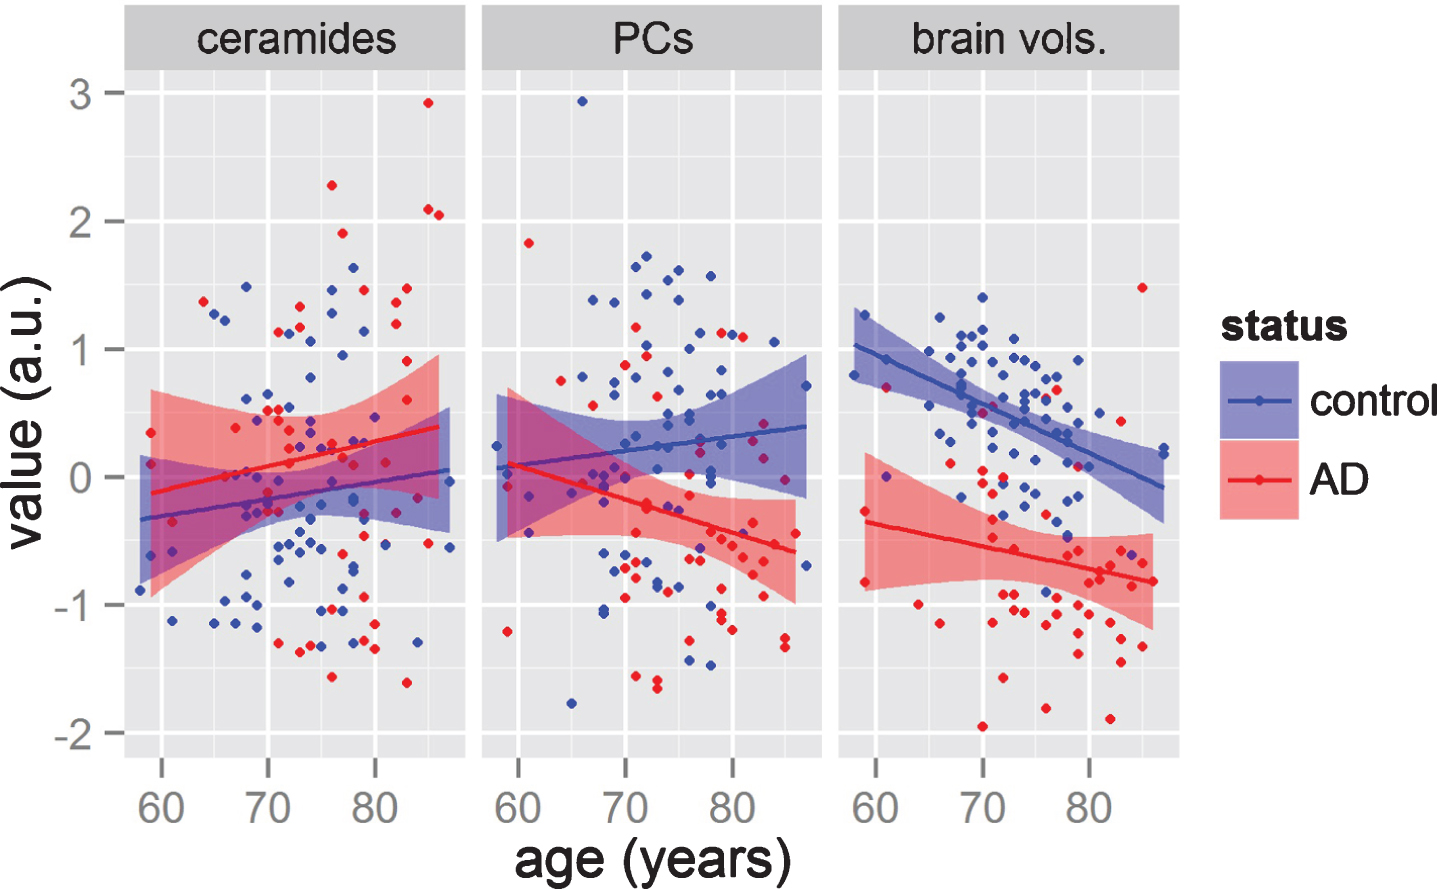 Comparisons on how variable groups (lipids and brain volume measurements) change with age in AD and control groups. The y-axis represents the averages of three groups of variables, namely: the six ceramides; the three phosphatidylcholines (PCs); and the four brain volumes (from left panel to right panel). The x-axis represents age. Each point presents a subject, while color represents the diagnosis of each patient. Solid line represents simple linear regression for each group, while the shaded area represents the 0.95 confidence interval.